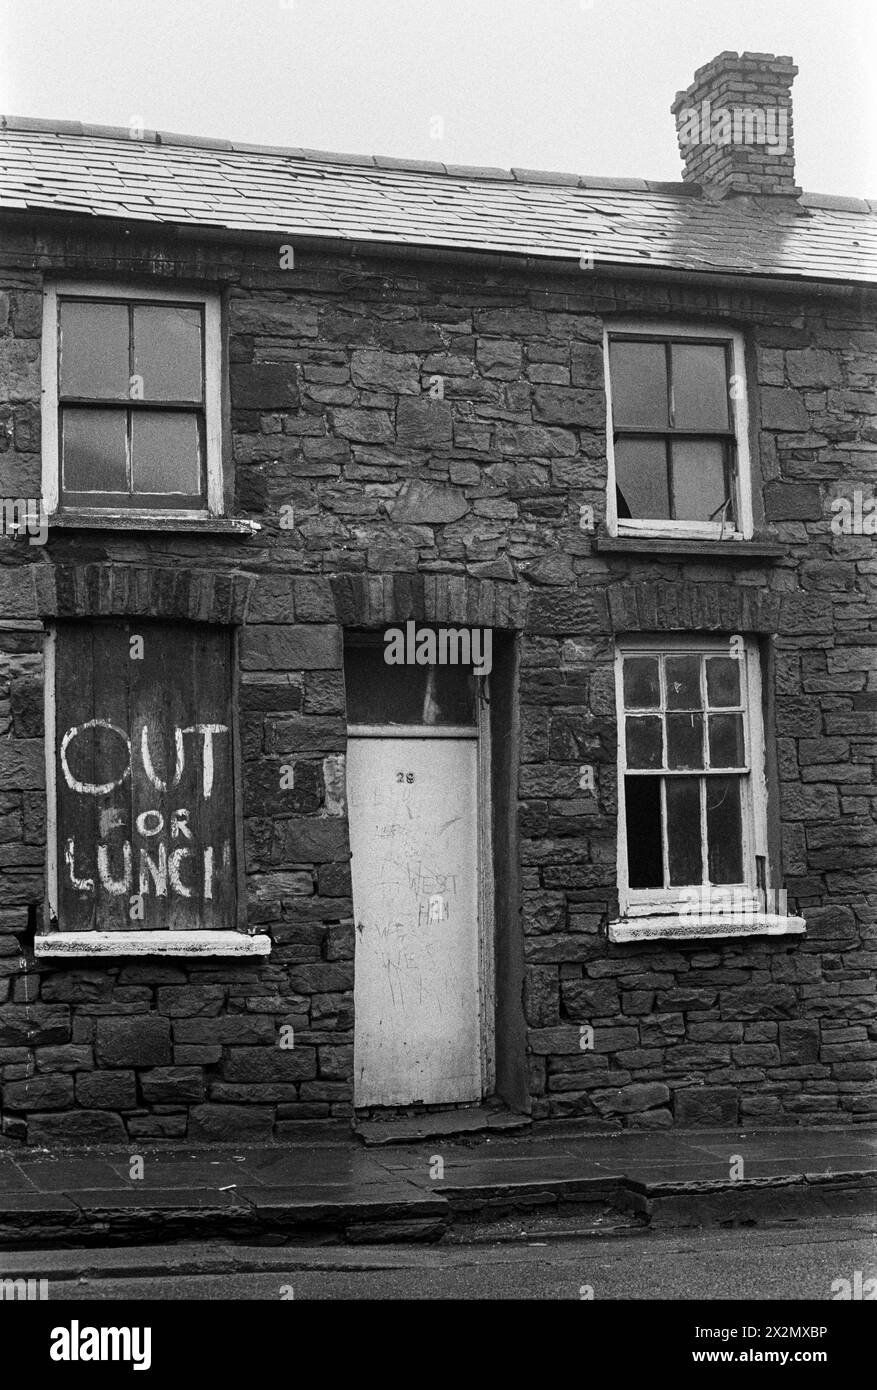 Humorous graffiti on a house awaiting demolition in Troedrhiwfuwch, South Wales, 1973. Stock Photo